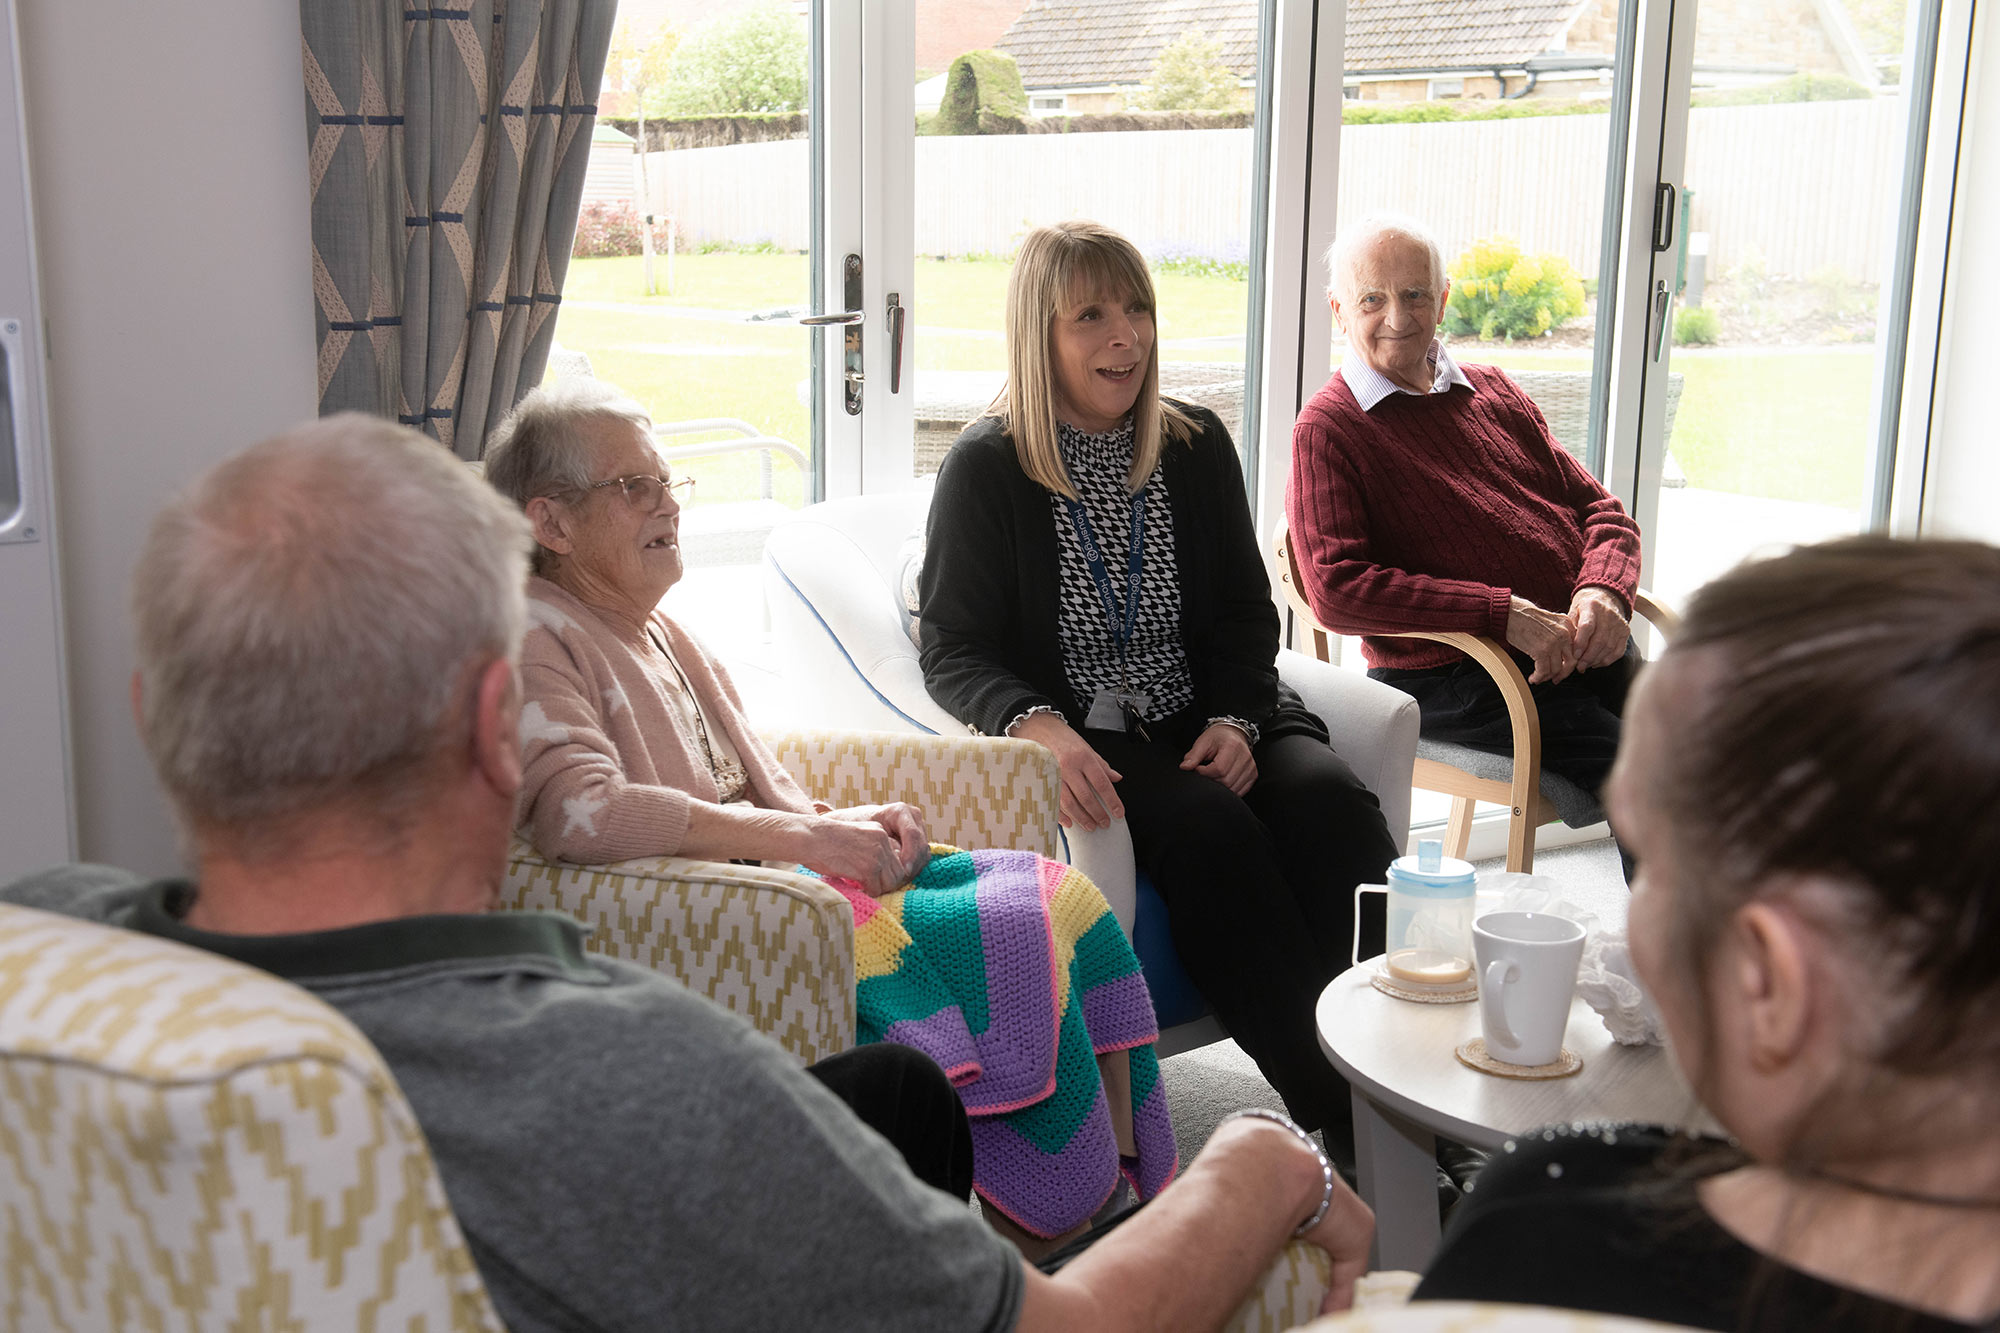 A group of people in an Extra Care setting